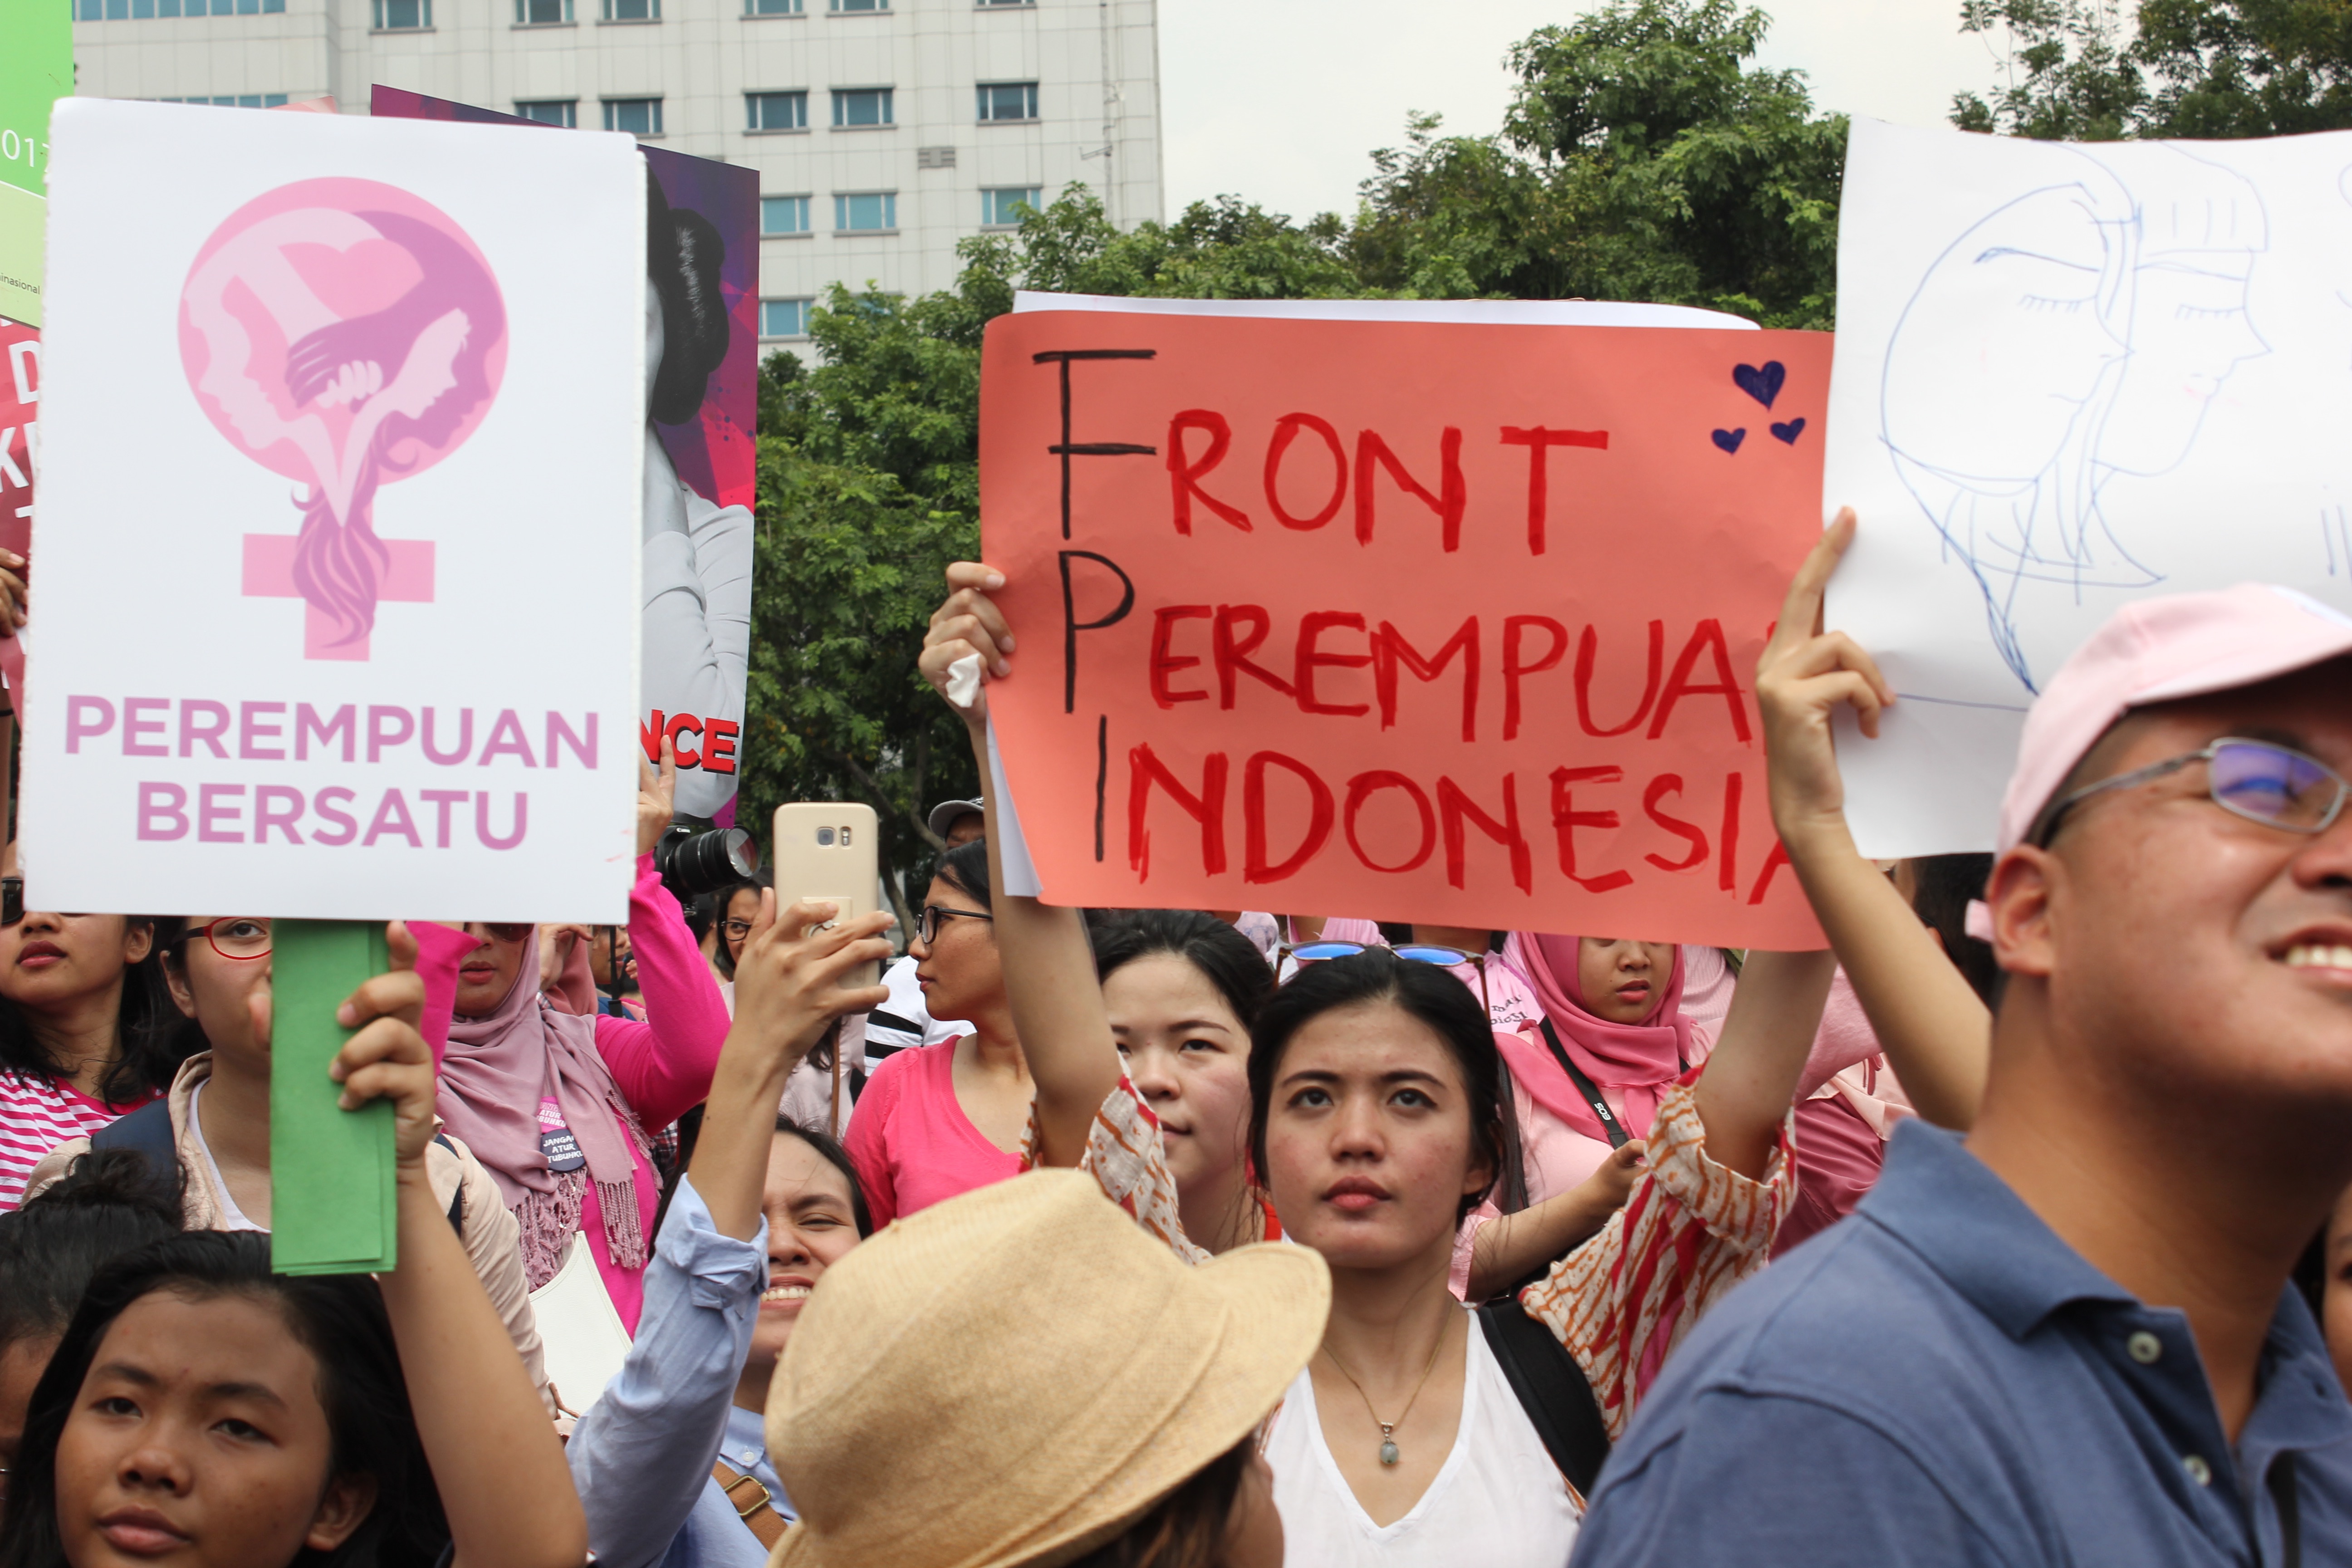 A demonstrator at the first Women’s March in Jakarta on March 4, 2017. holding a sign that reads “Front Perempuan Indonesia” or “Indonesian Women’s Front” (satirizing the ultra-conservative Islamic group Front Pembela Islam, which also shares the same initials). Photo: Coconuts Indonesia / Andra Nasrie